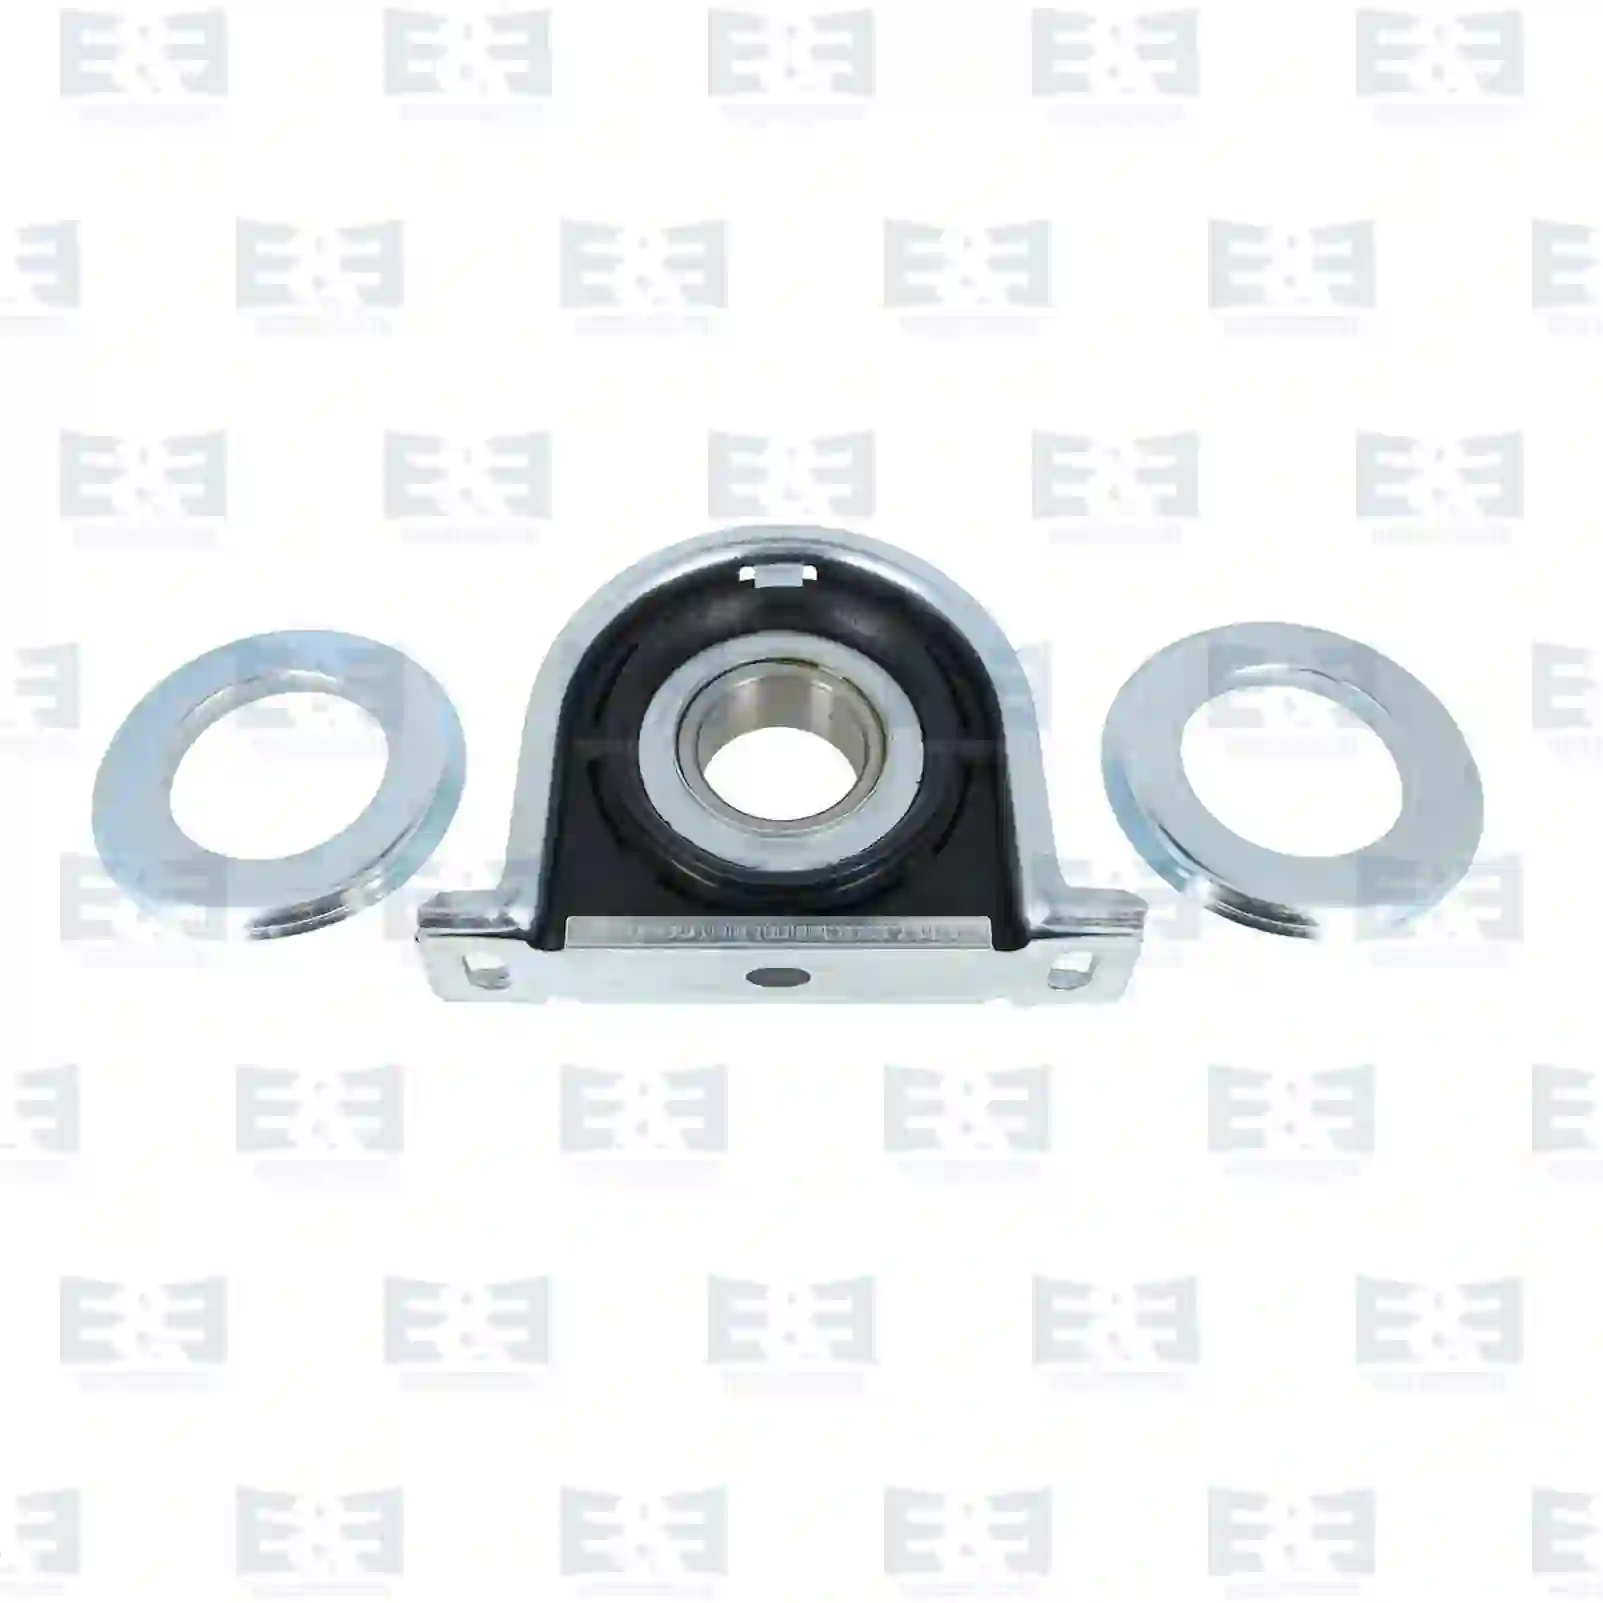 Support Bearing Center bearing, EE No 2E2276970 ,  oem no:5000819211, 7420876294, 20876294, ZG02496-0008 E&E Truck Spare Parts | Truck Spare Parts, Auotomotive Spare Parts